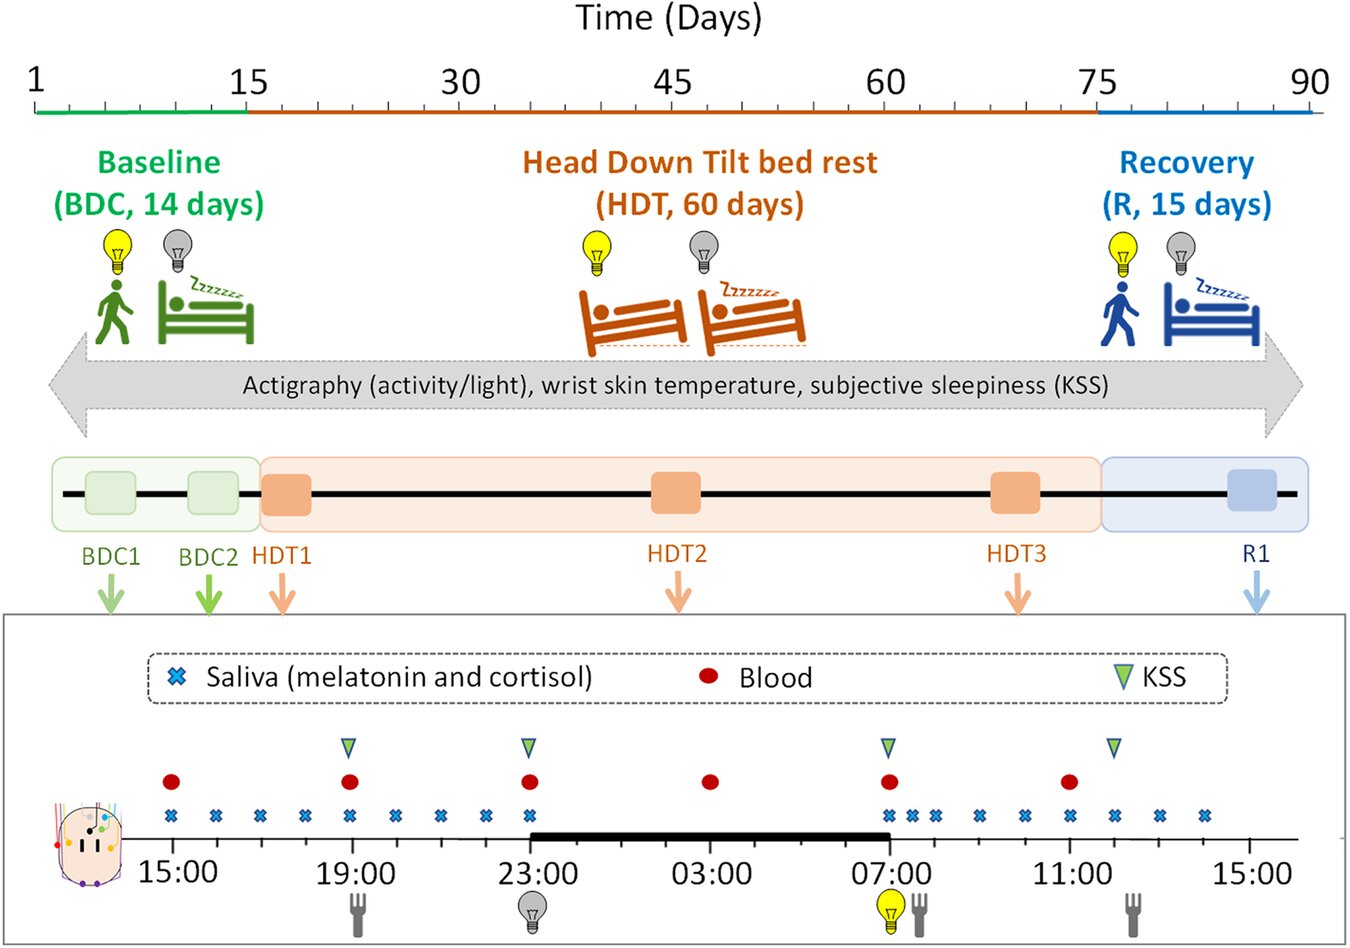 Simulated microgravity affects sleep and physiological rhythms, study finds